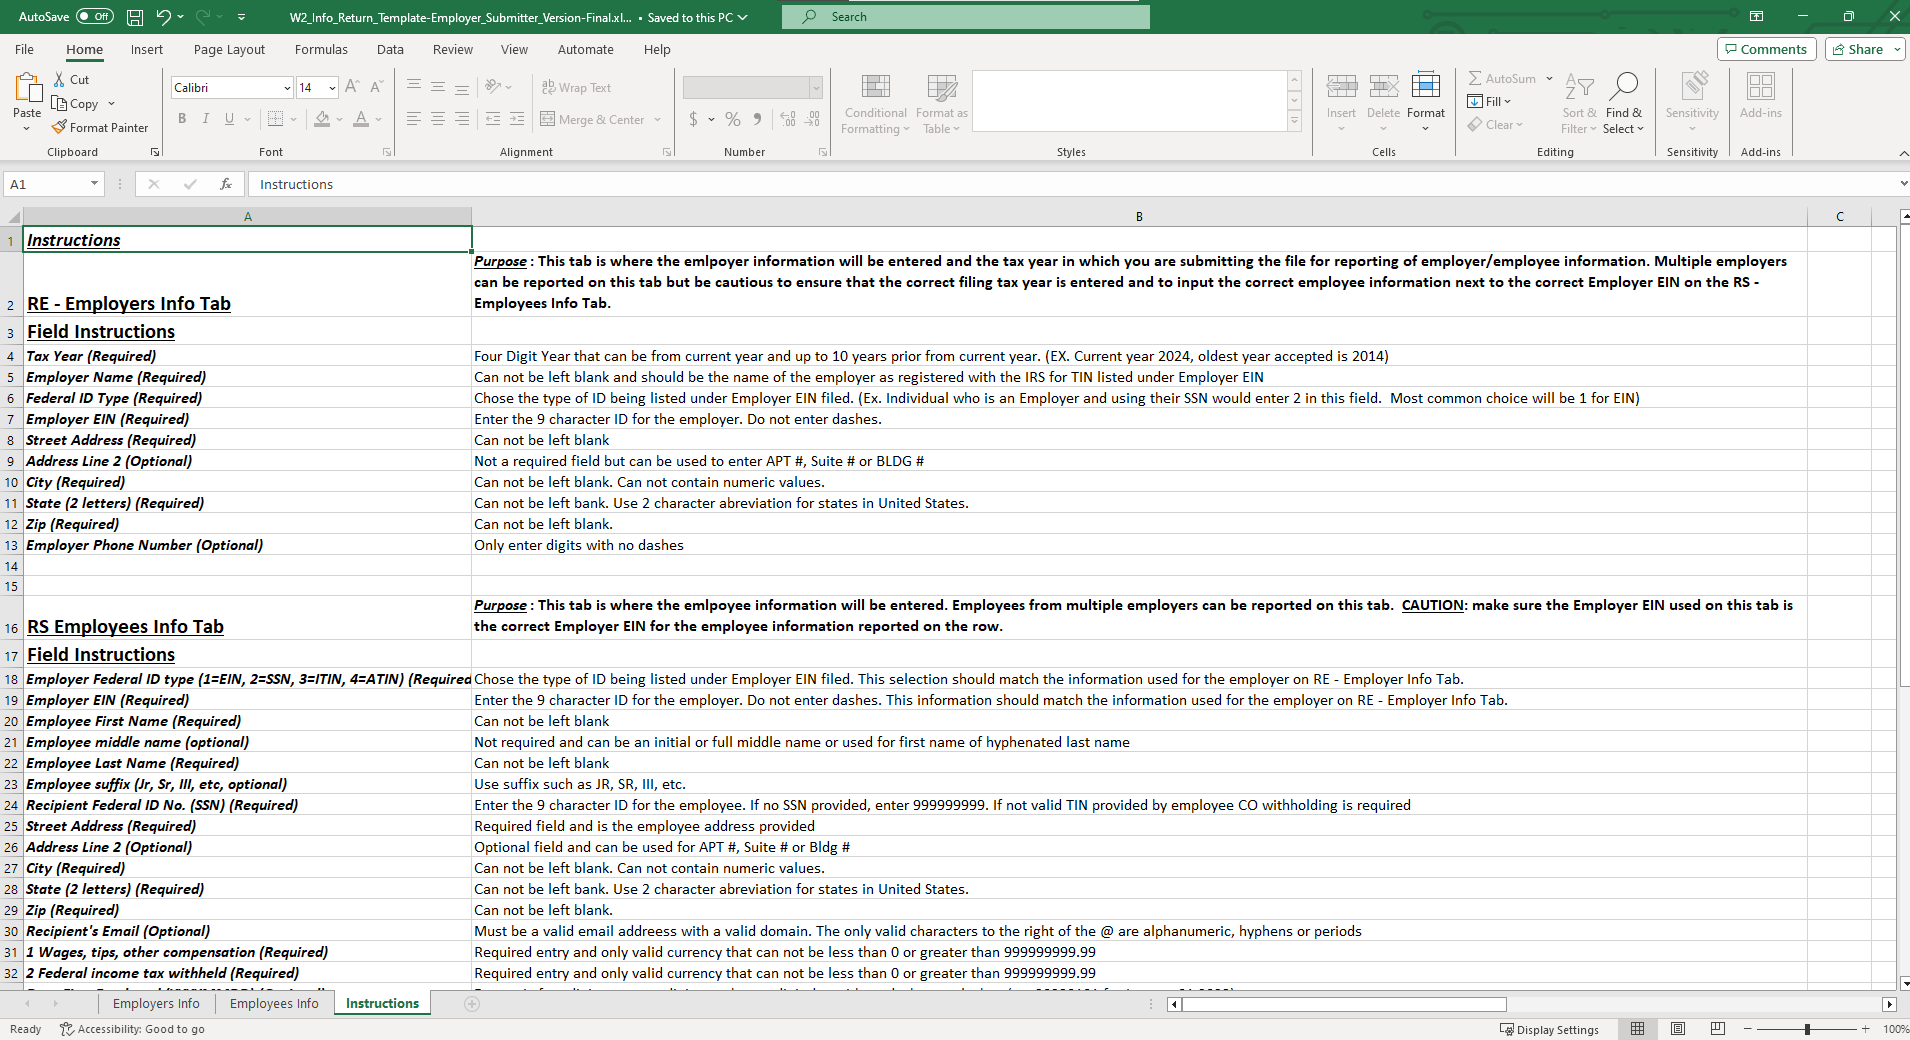 Screenshot of W2 Instructions from Excel Spreadsheet